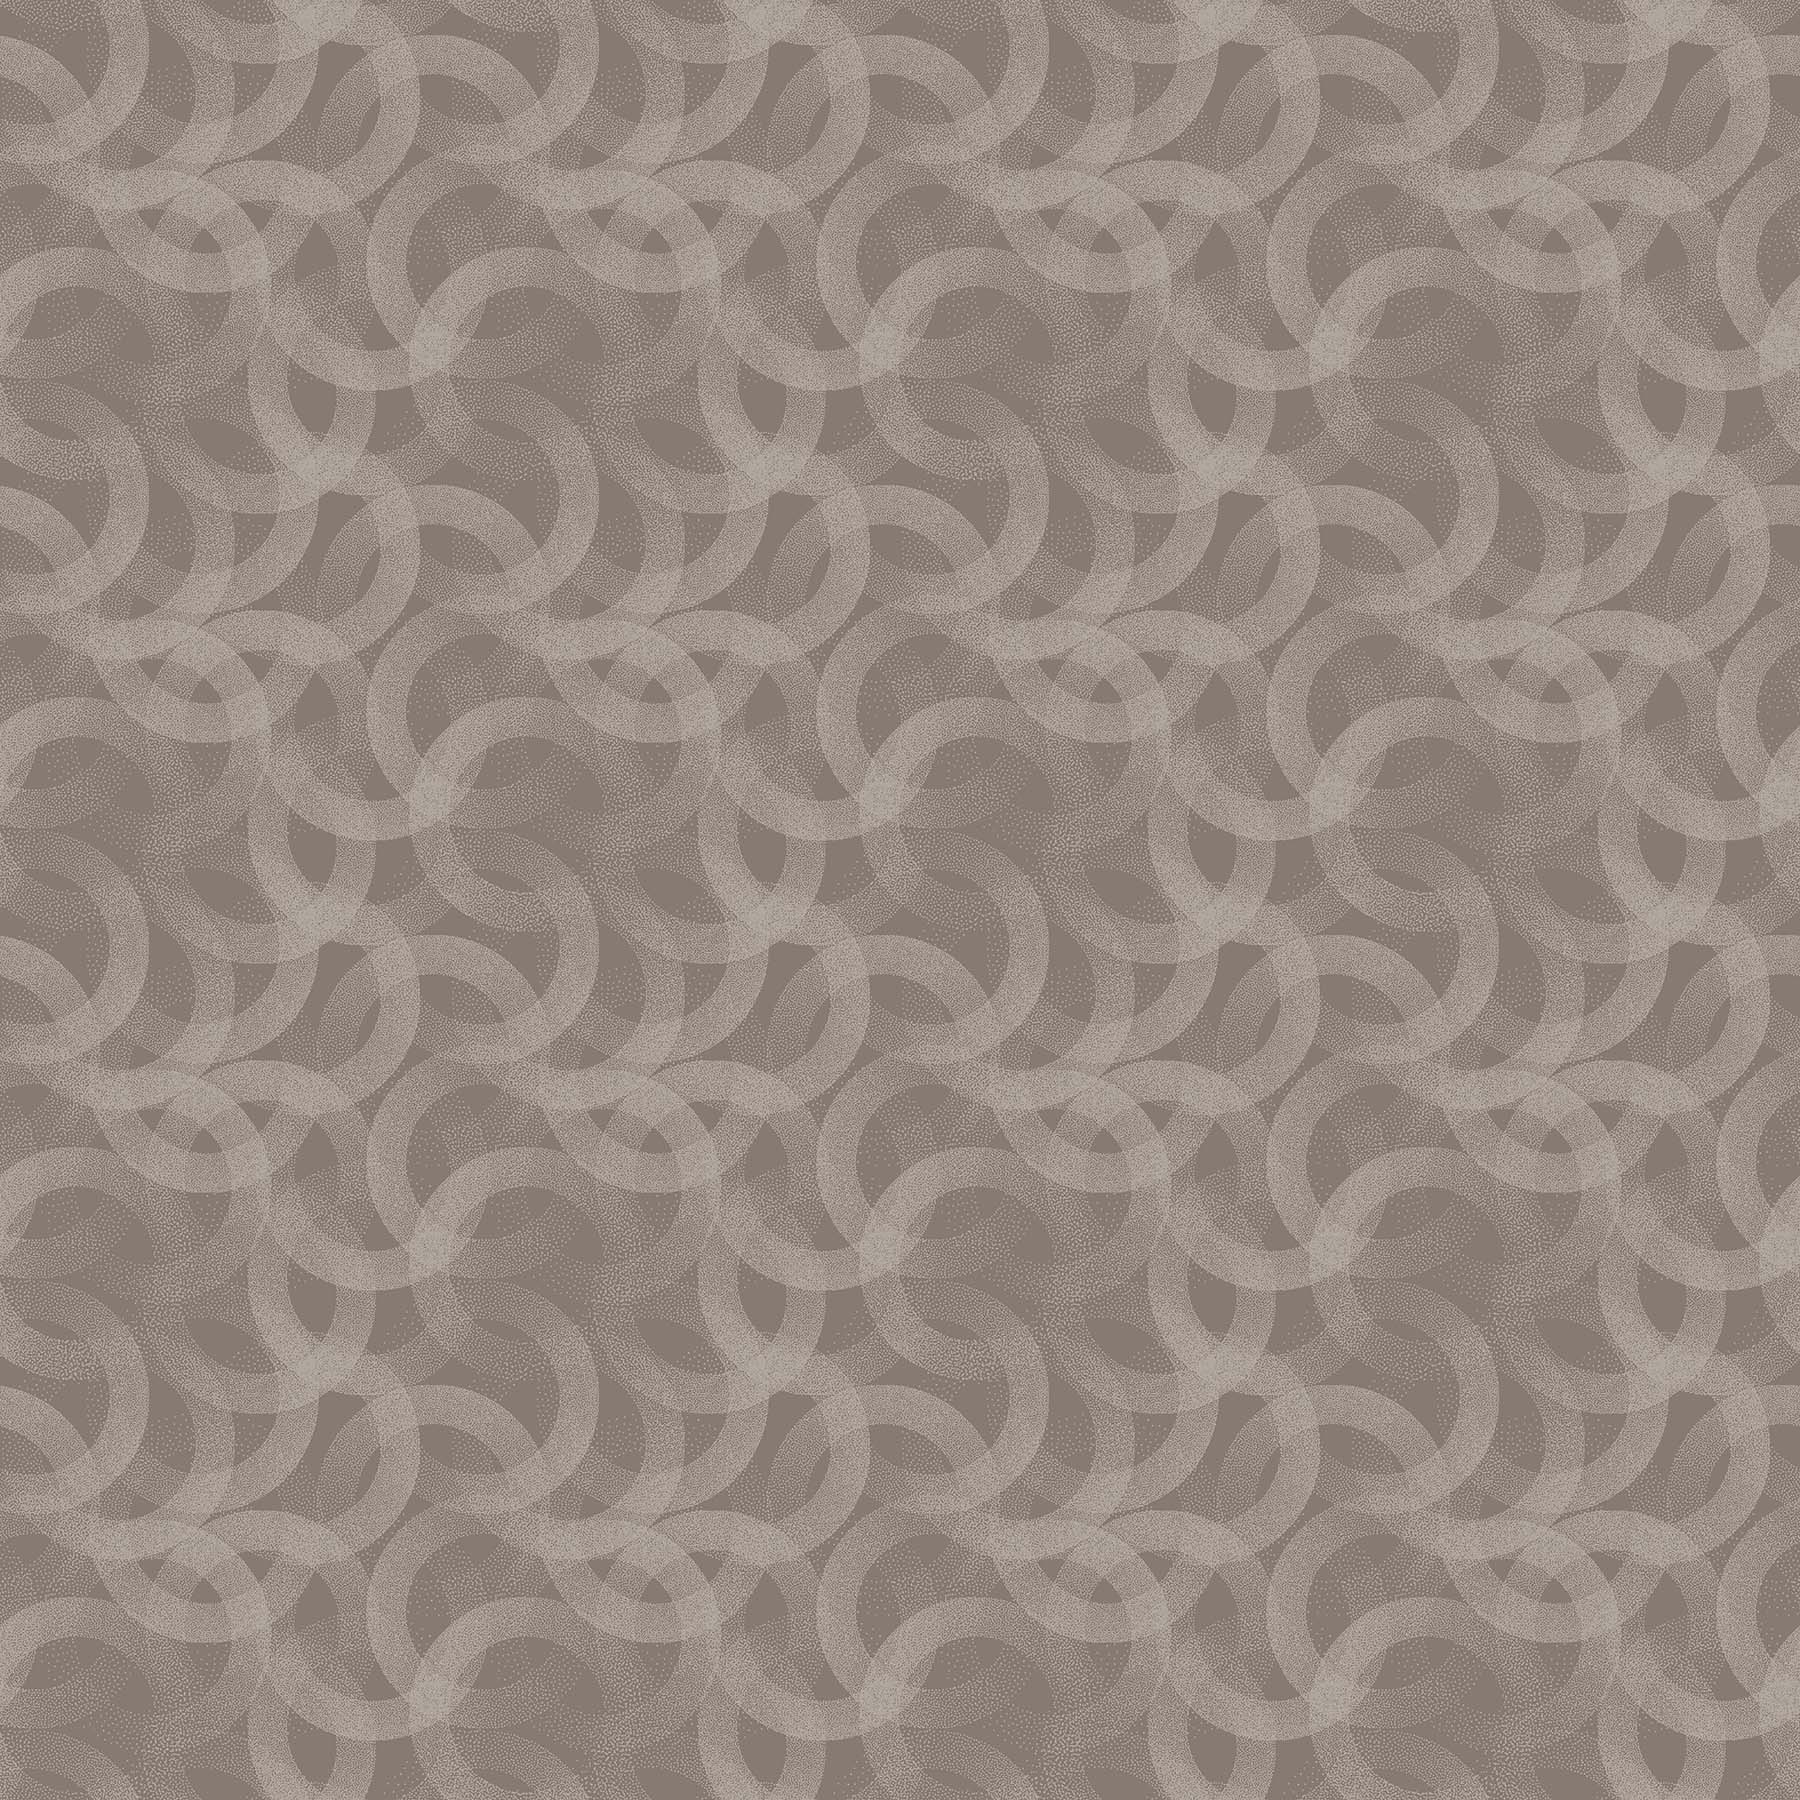 Brown Clay Texture Fade Stippled Rings Cotton Fabric per yard - Linda's Electric Quilters